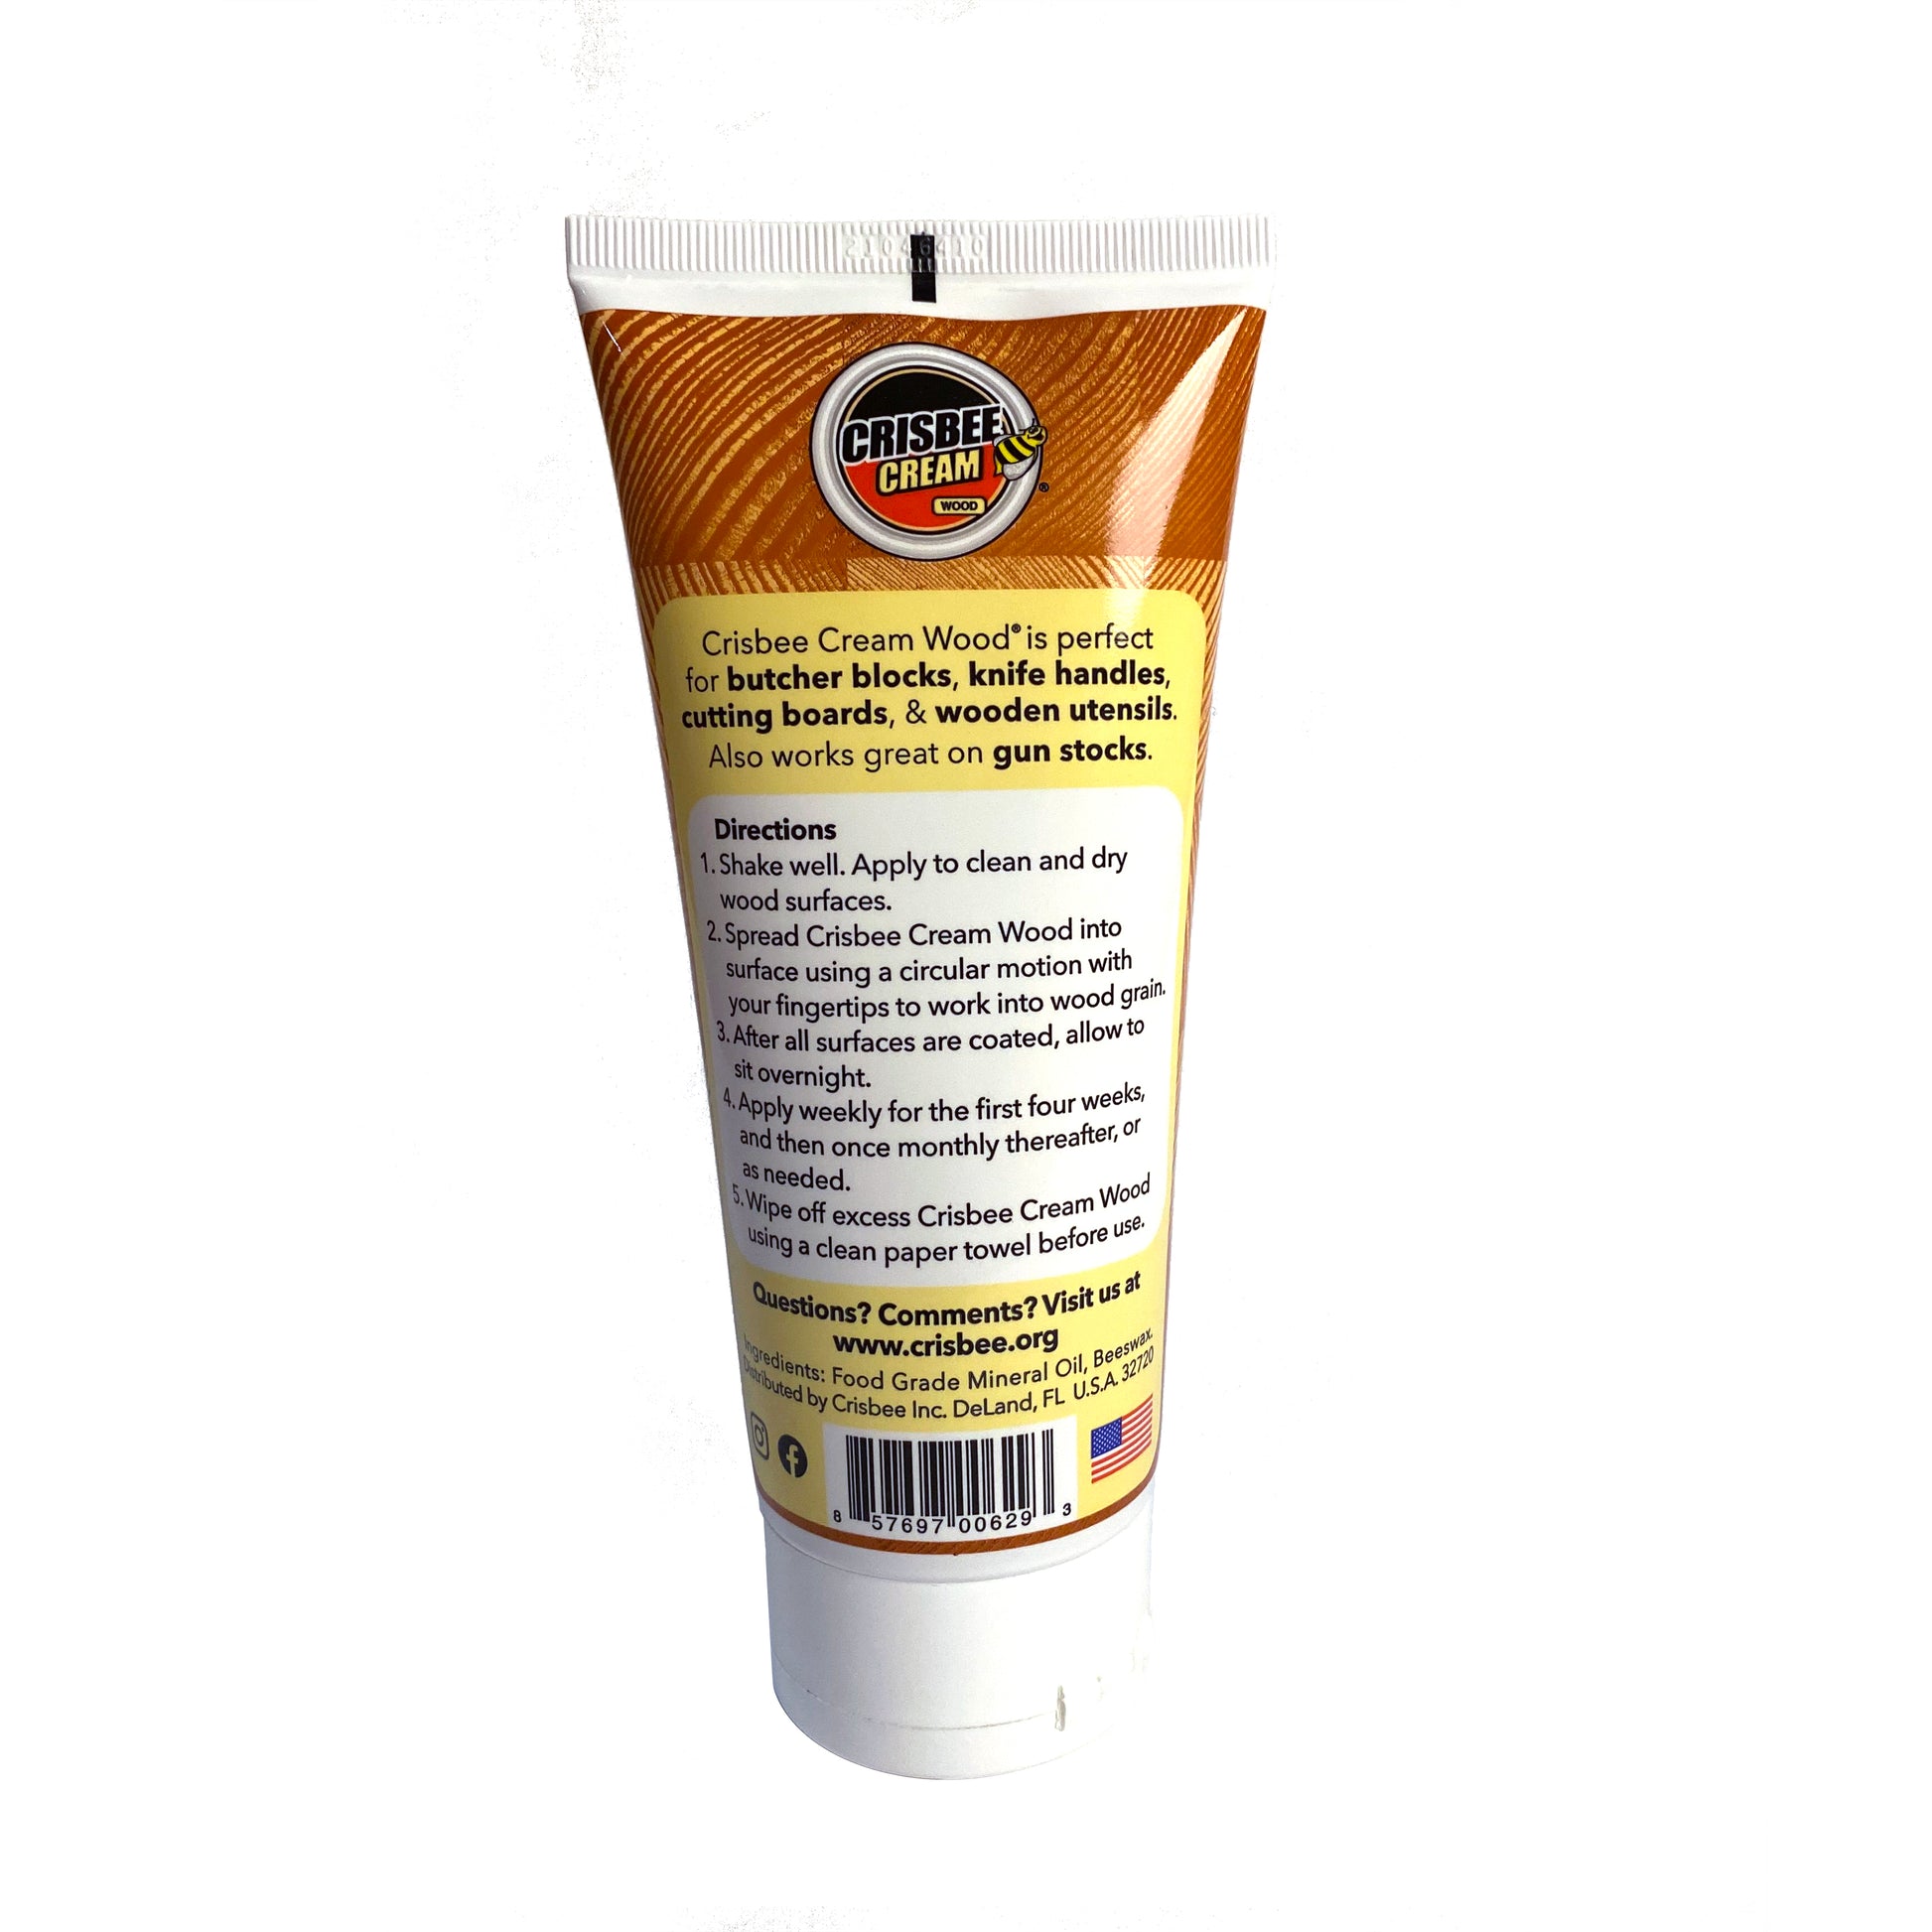 Crisbee Cream Wood - All in one wood conditioner back